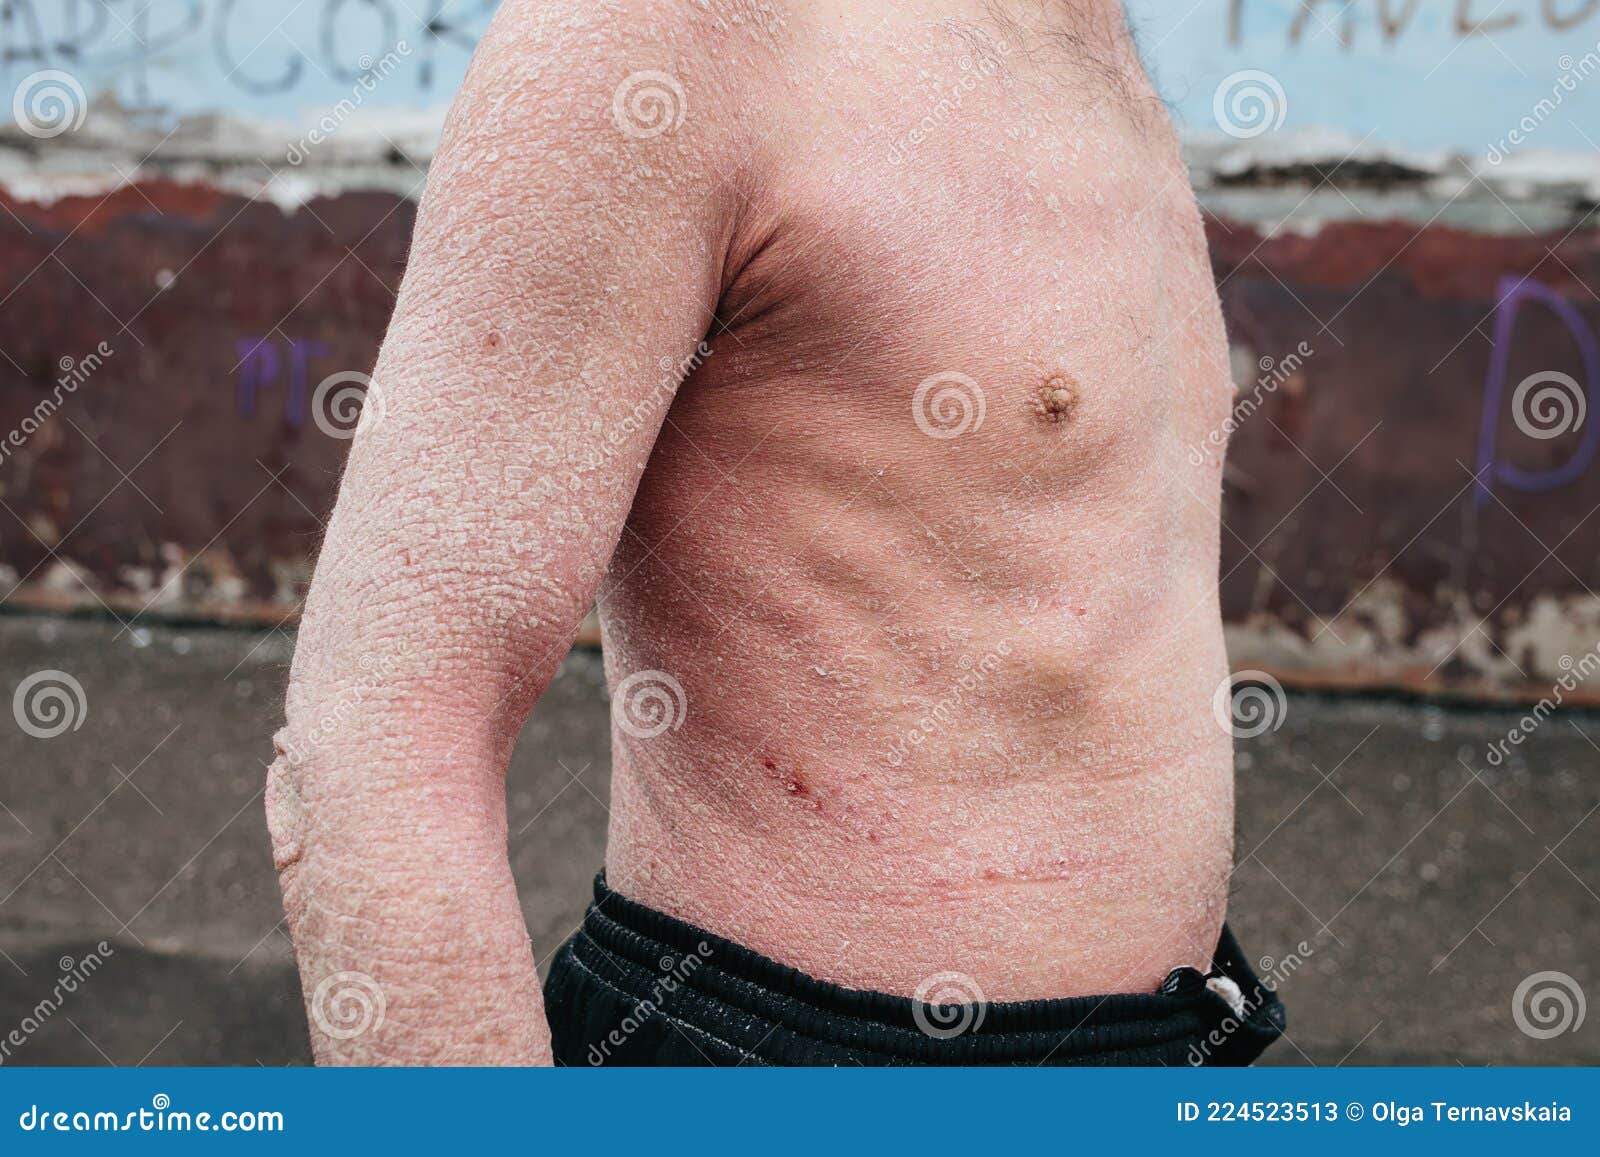 A Man With Psoriasis On His Back And Neck Scratch With His Hand